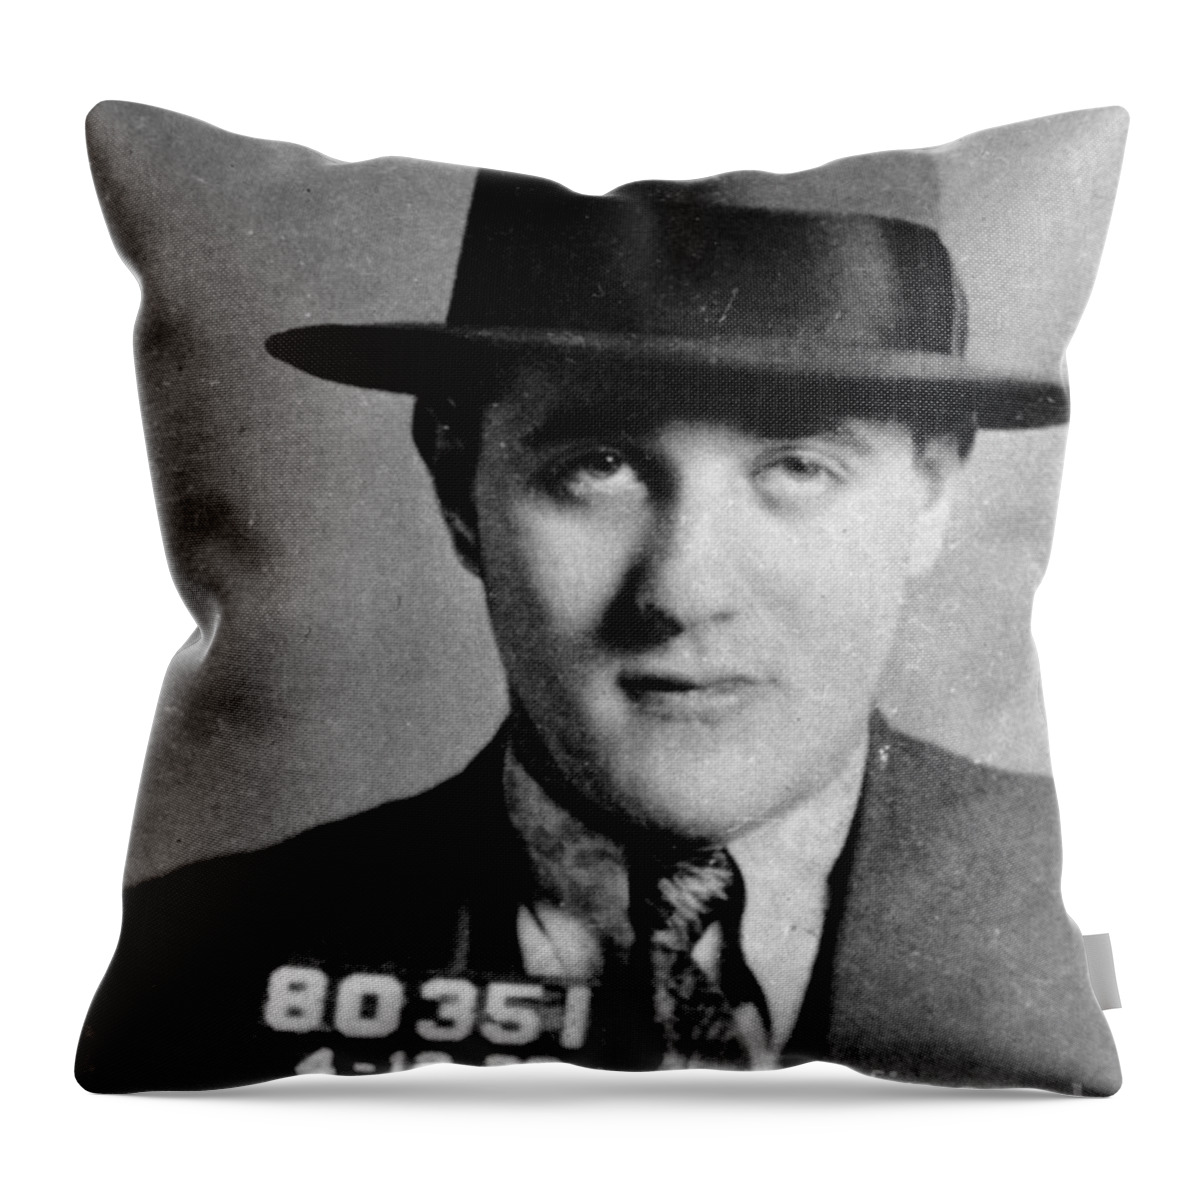 1928 Throw Pillow featuring the photograph Benjamin Bugsy Siegel Mugshot by Granger